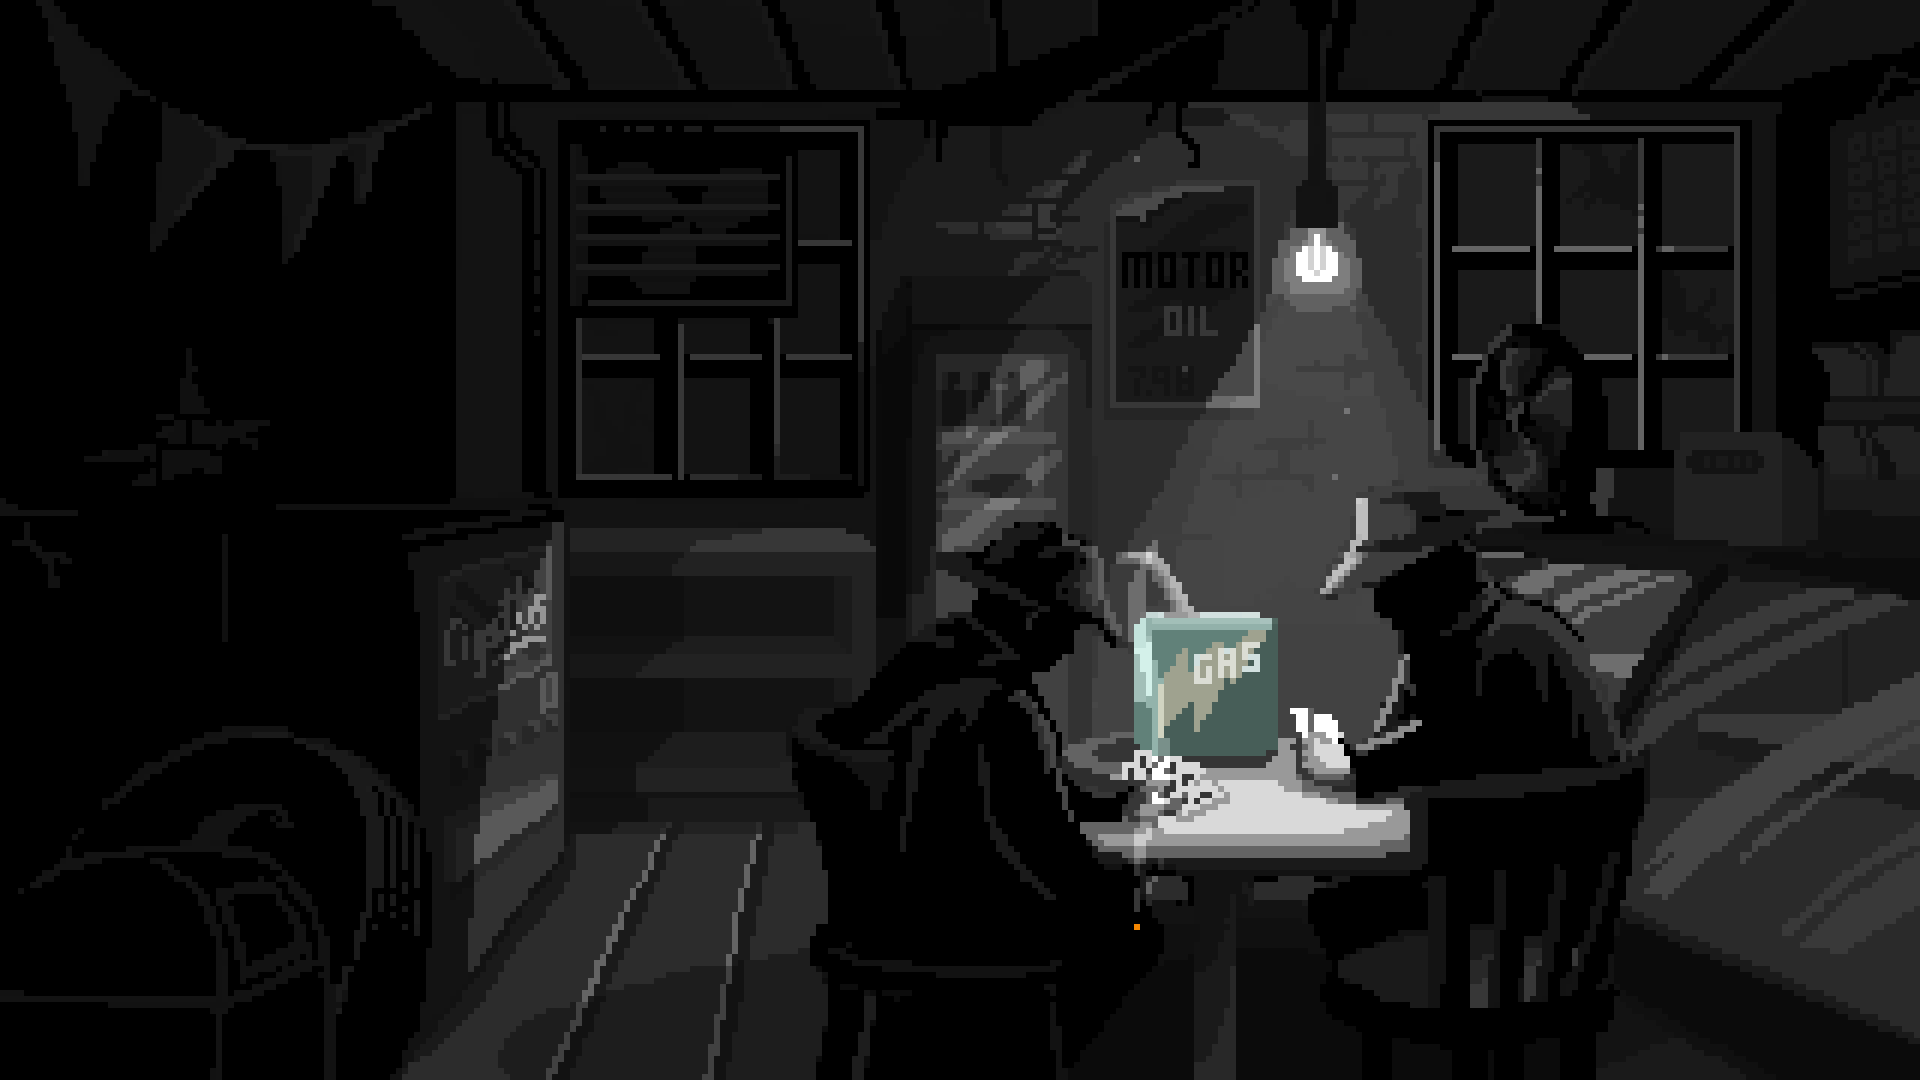 Still from the noir pixel art music video "Isolation" by Turin Brakes, showing two men sitting at a dimly lit table of an American gas station. Directed and animated by pixel artist Stefanie Grunwald.